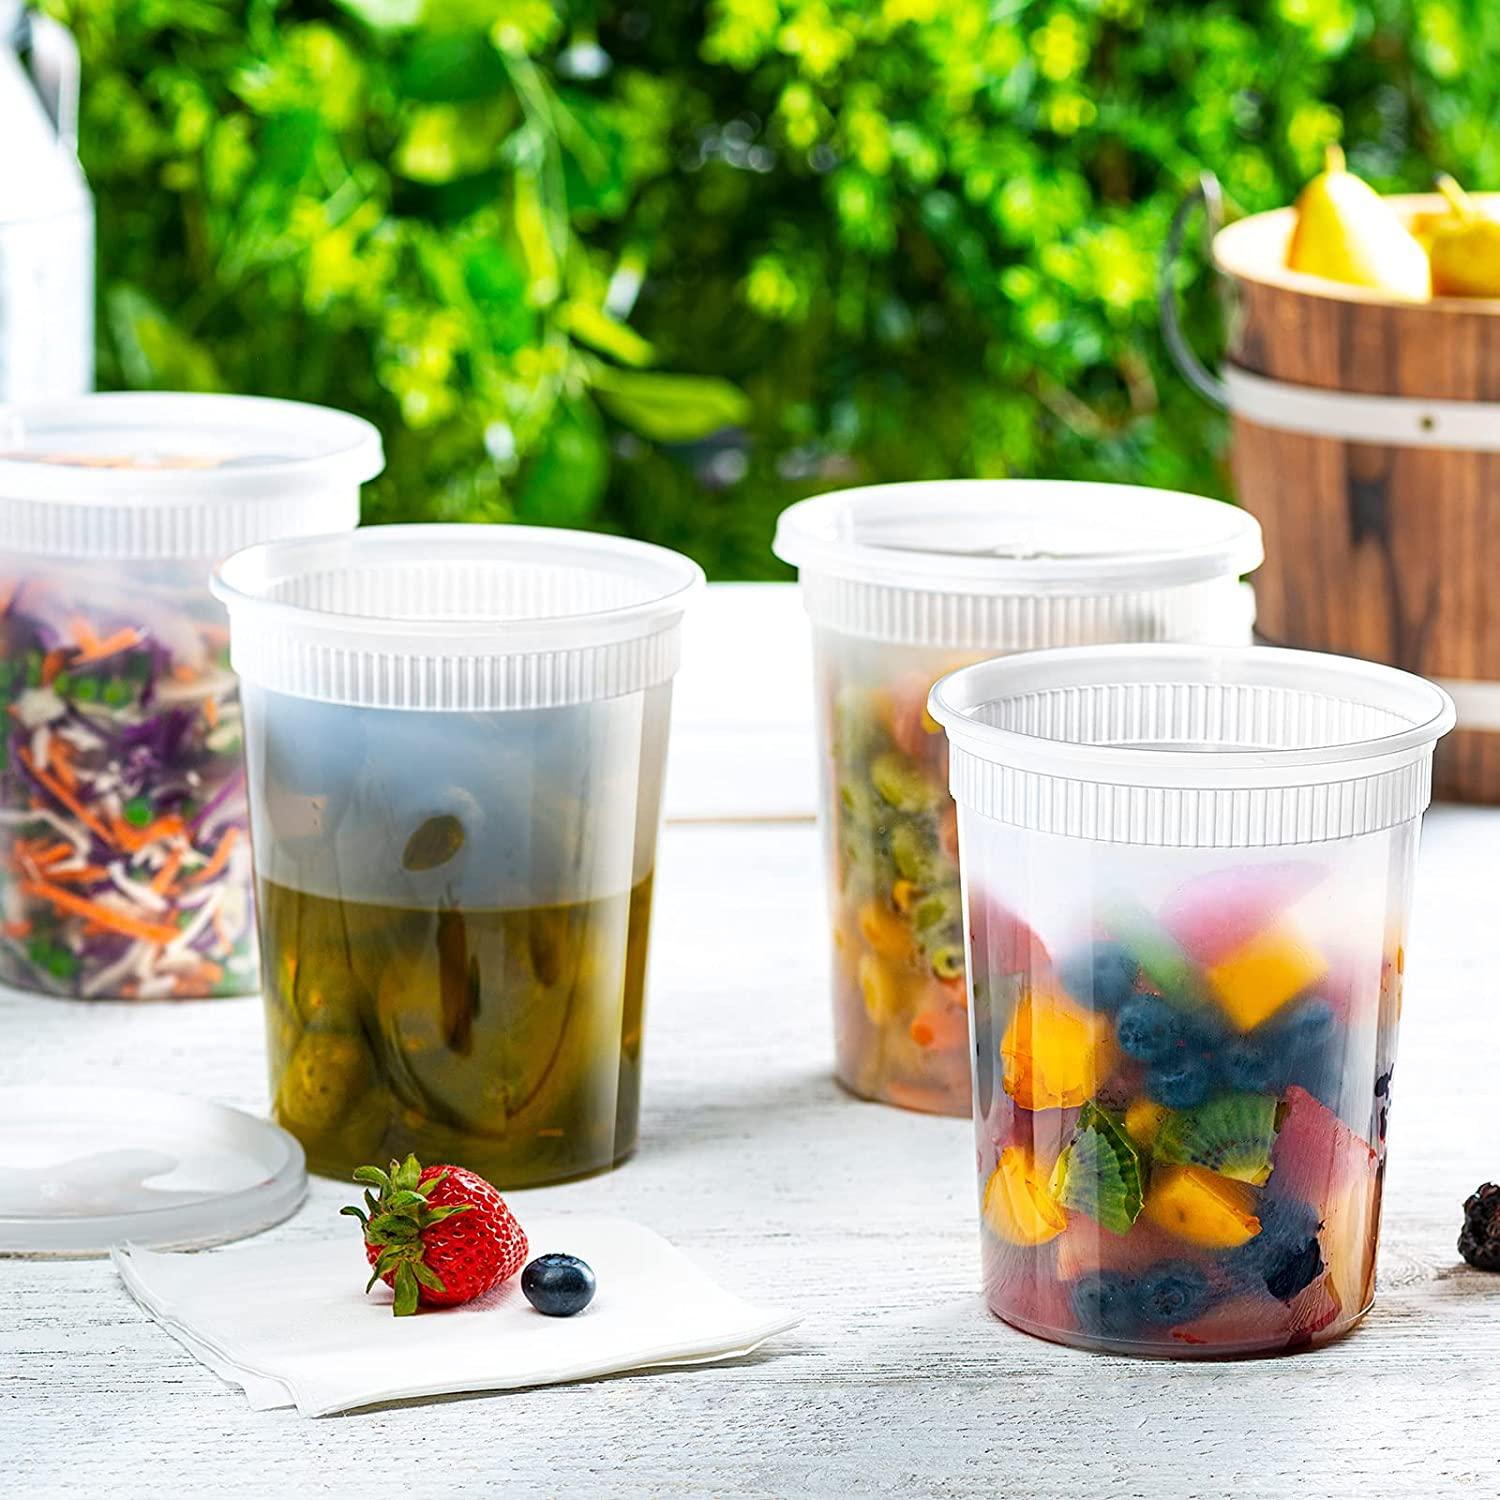 48 Sets - Combo Plastic Deli Containers With Airtight Lids - 8 oz, 16 oz,  32 oz. - Food Storage/Soup Containers Combo - 48 Sets